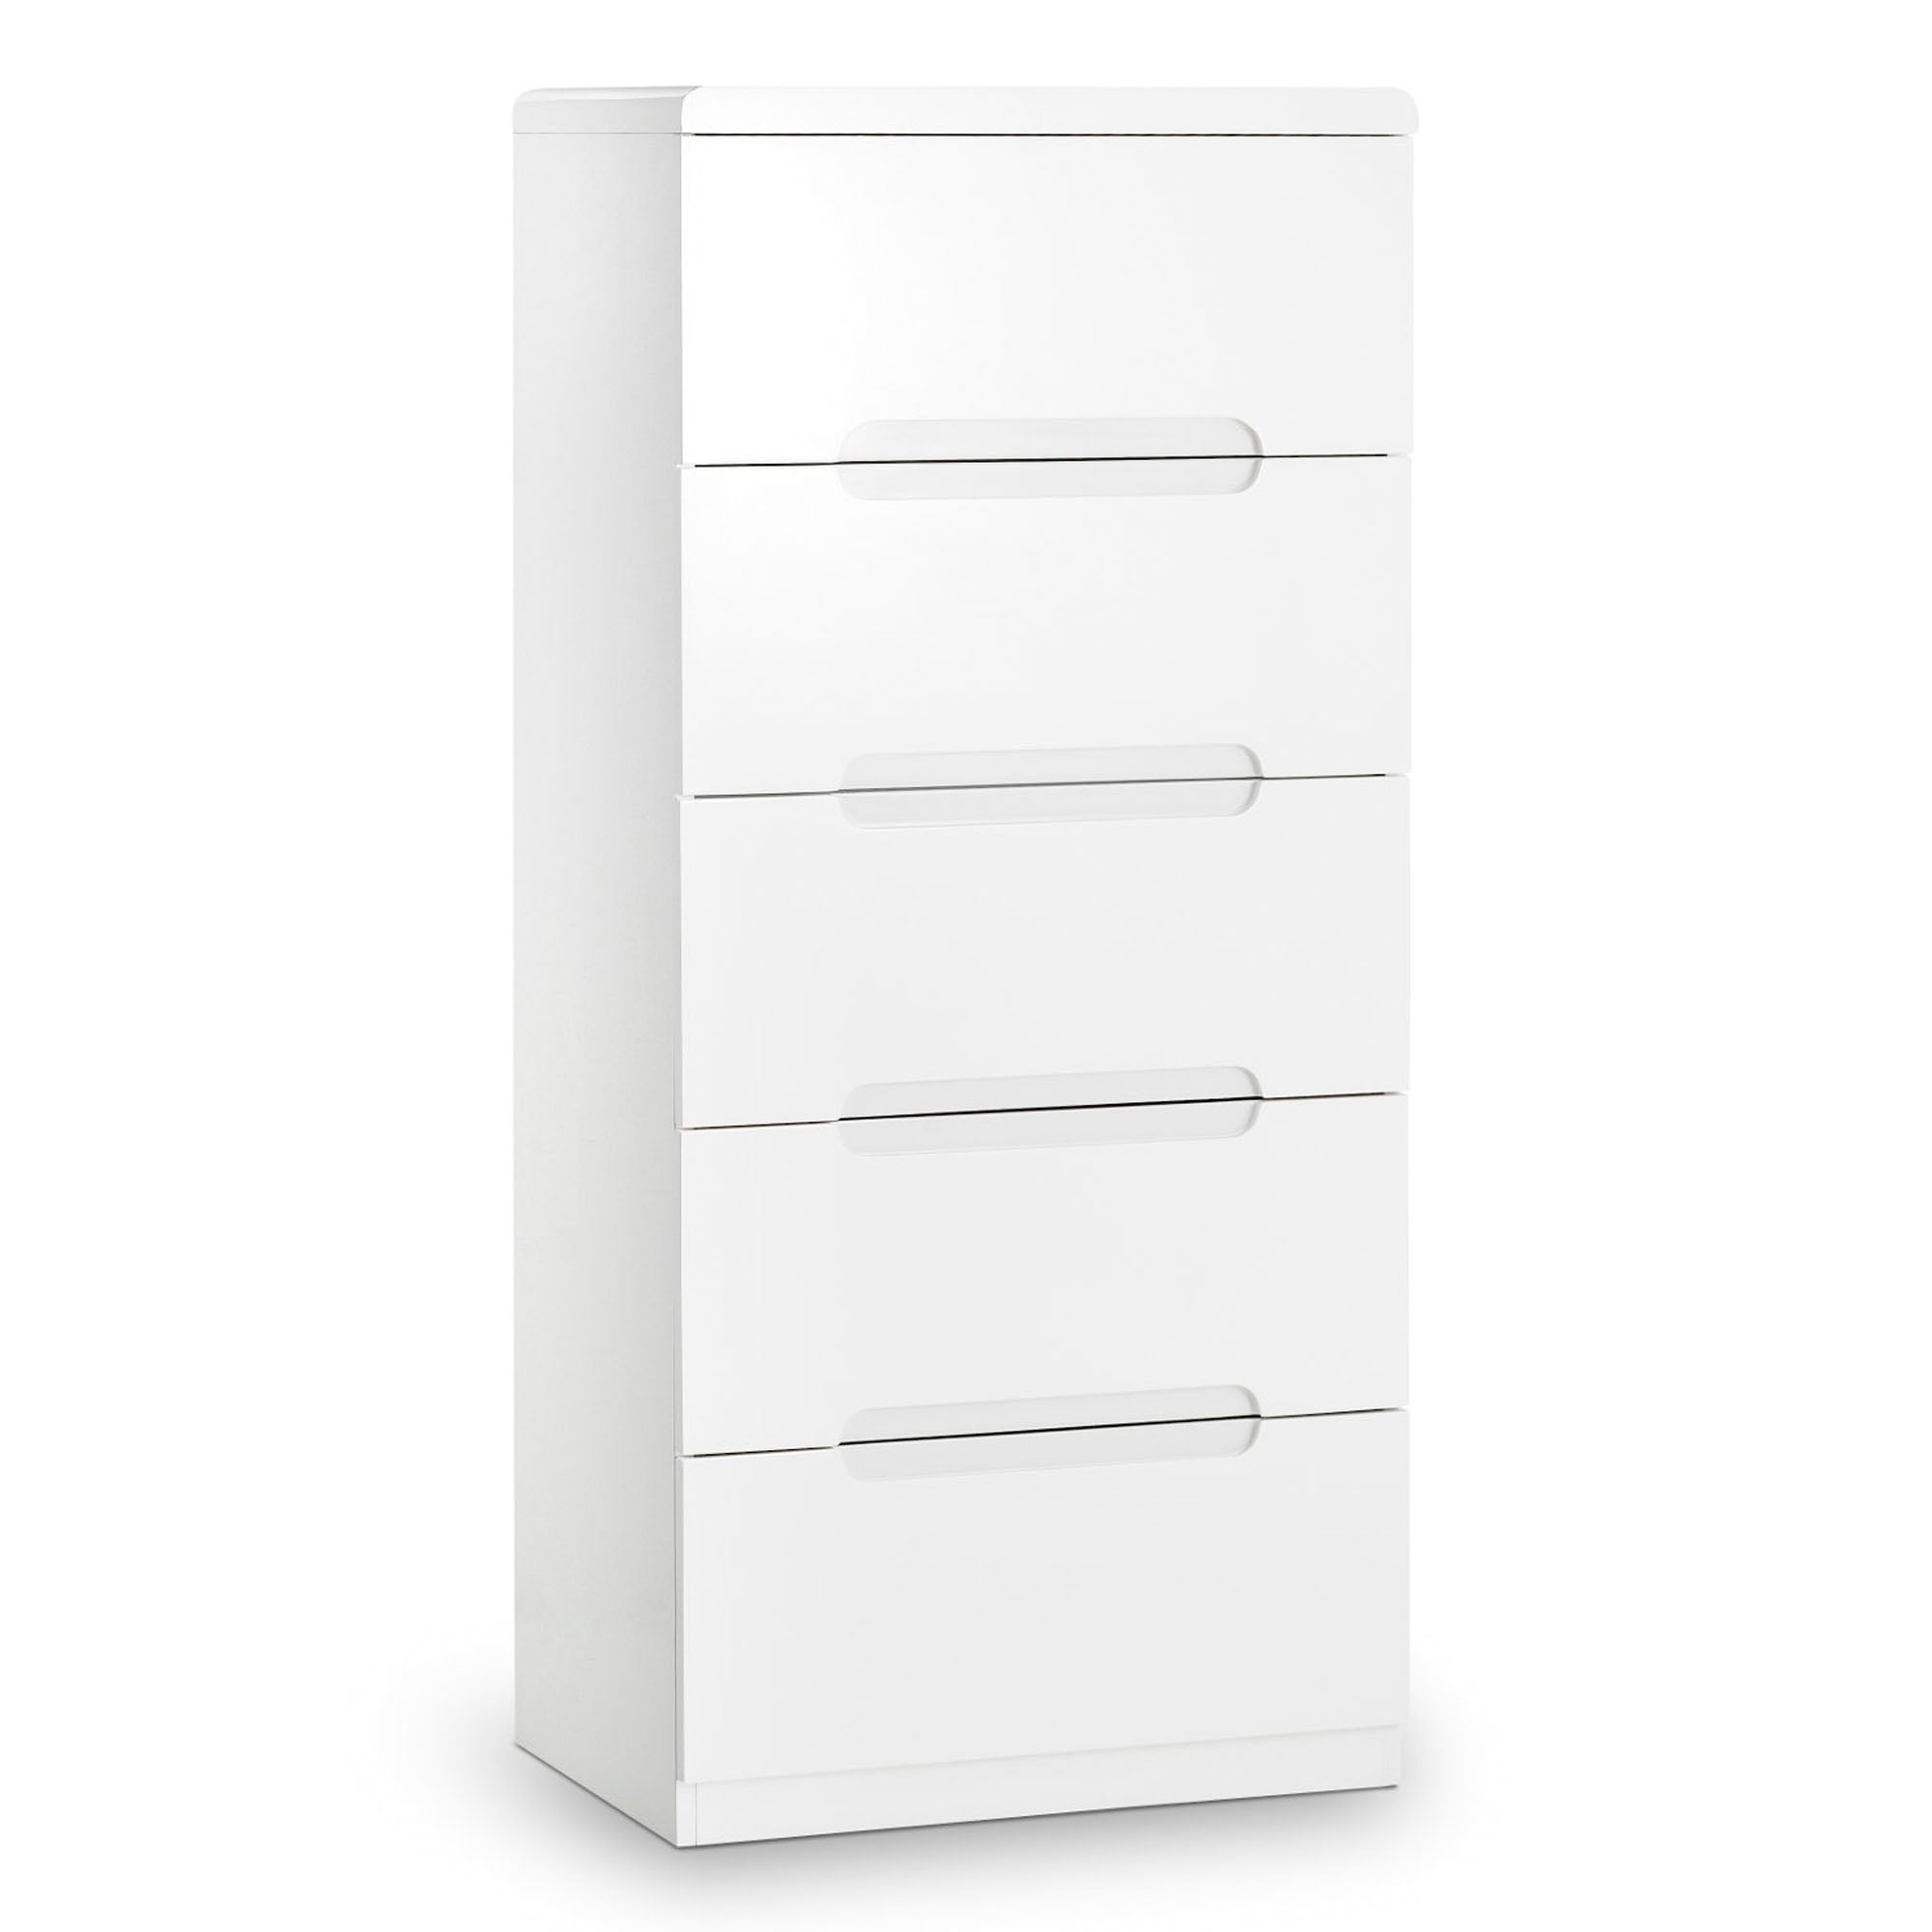 Chest of Drawers | White and Oak Chest of Drawers | Dunelm | Page 2